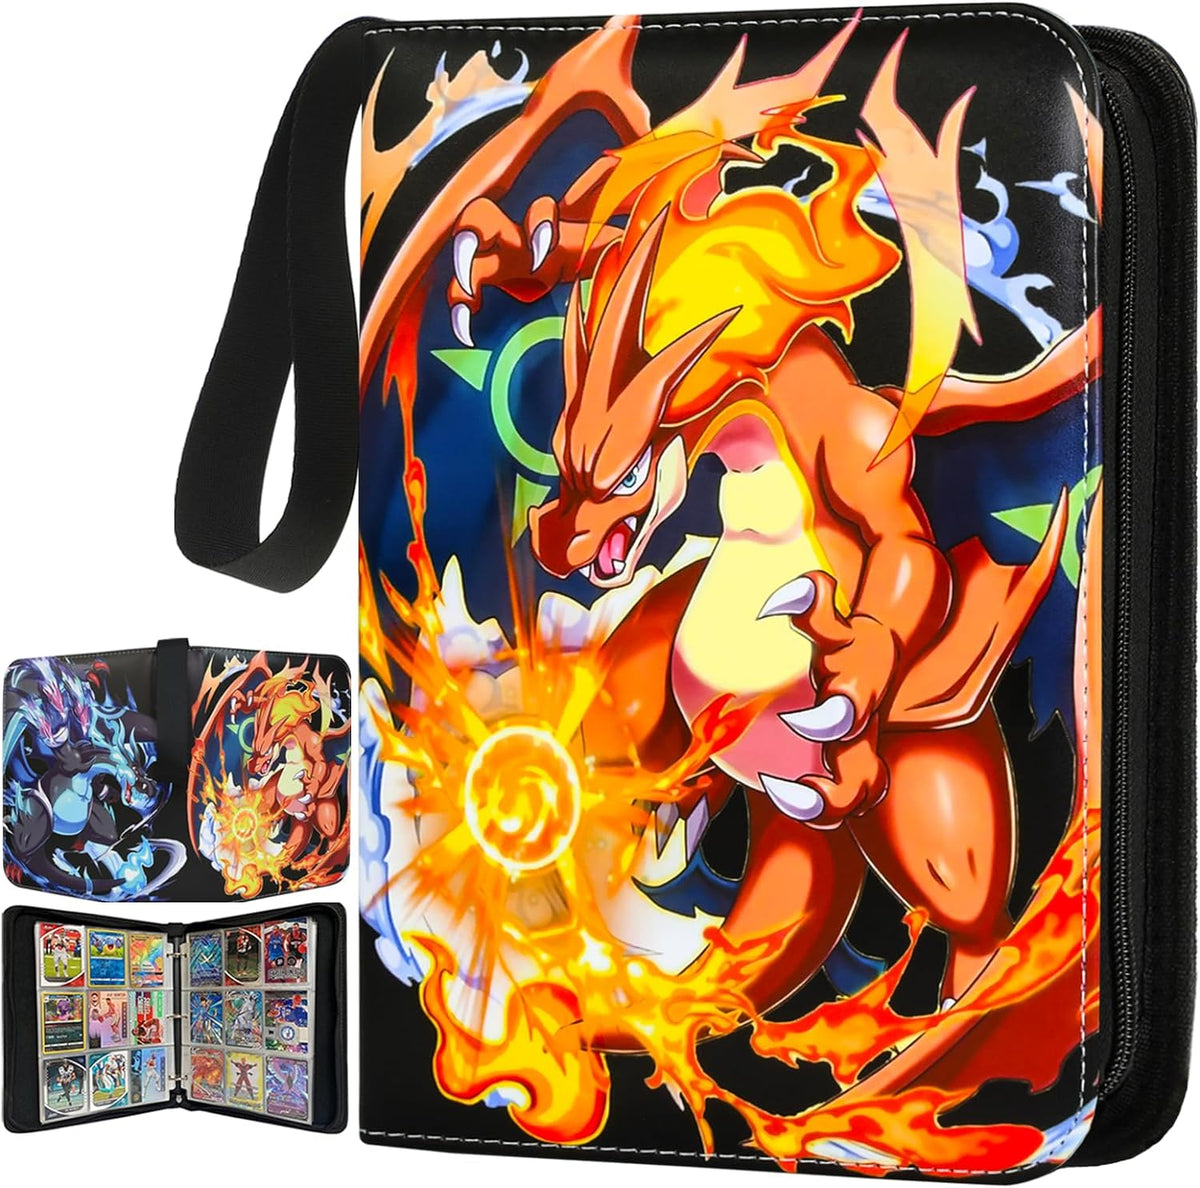 Card Binder for Pokemon Cards Holder 9-Pocket, Trading Binders for Card Games Collection Case Book Fits 900 Cards With 50 Removable Sleeves Display Storage Carrying Case